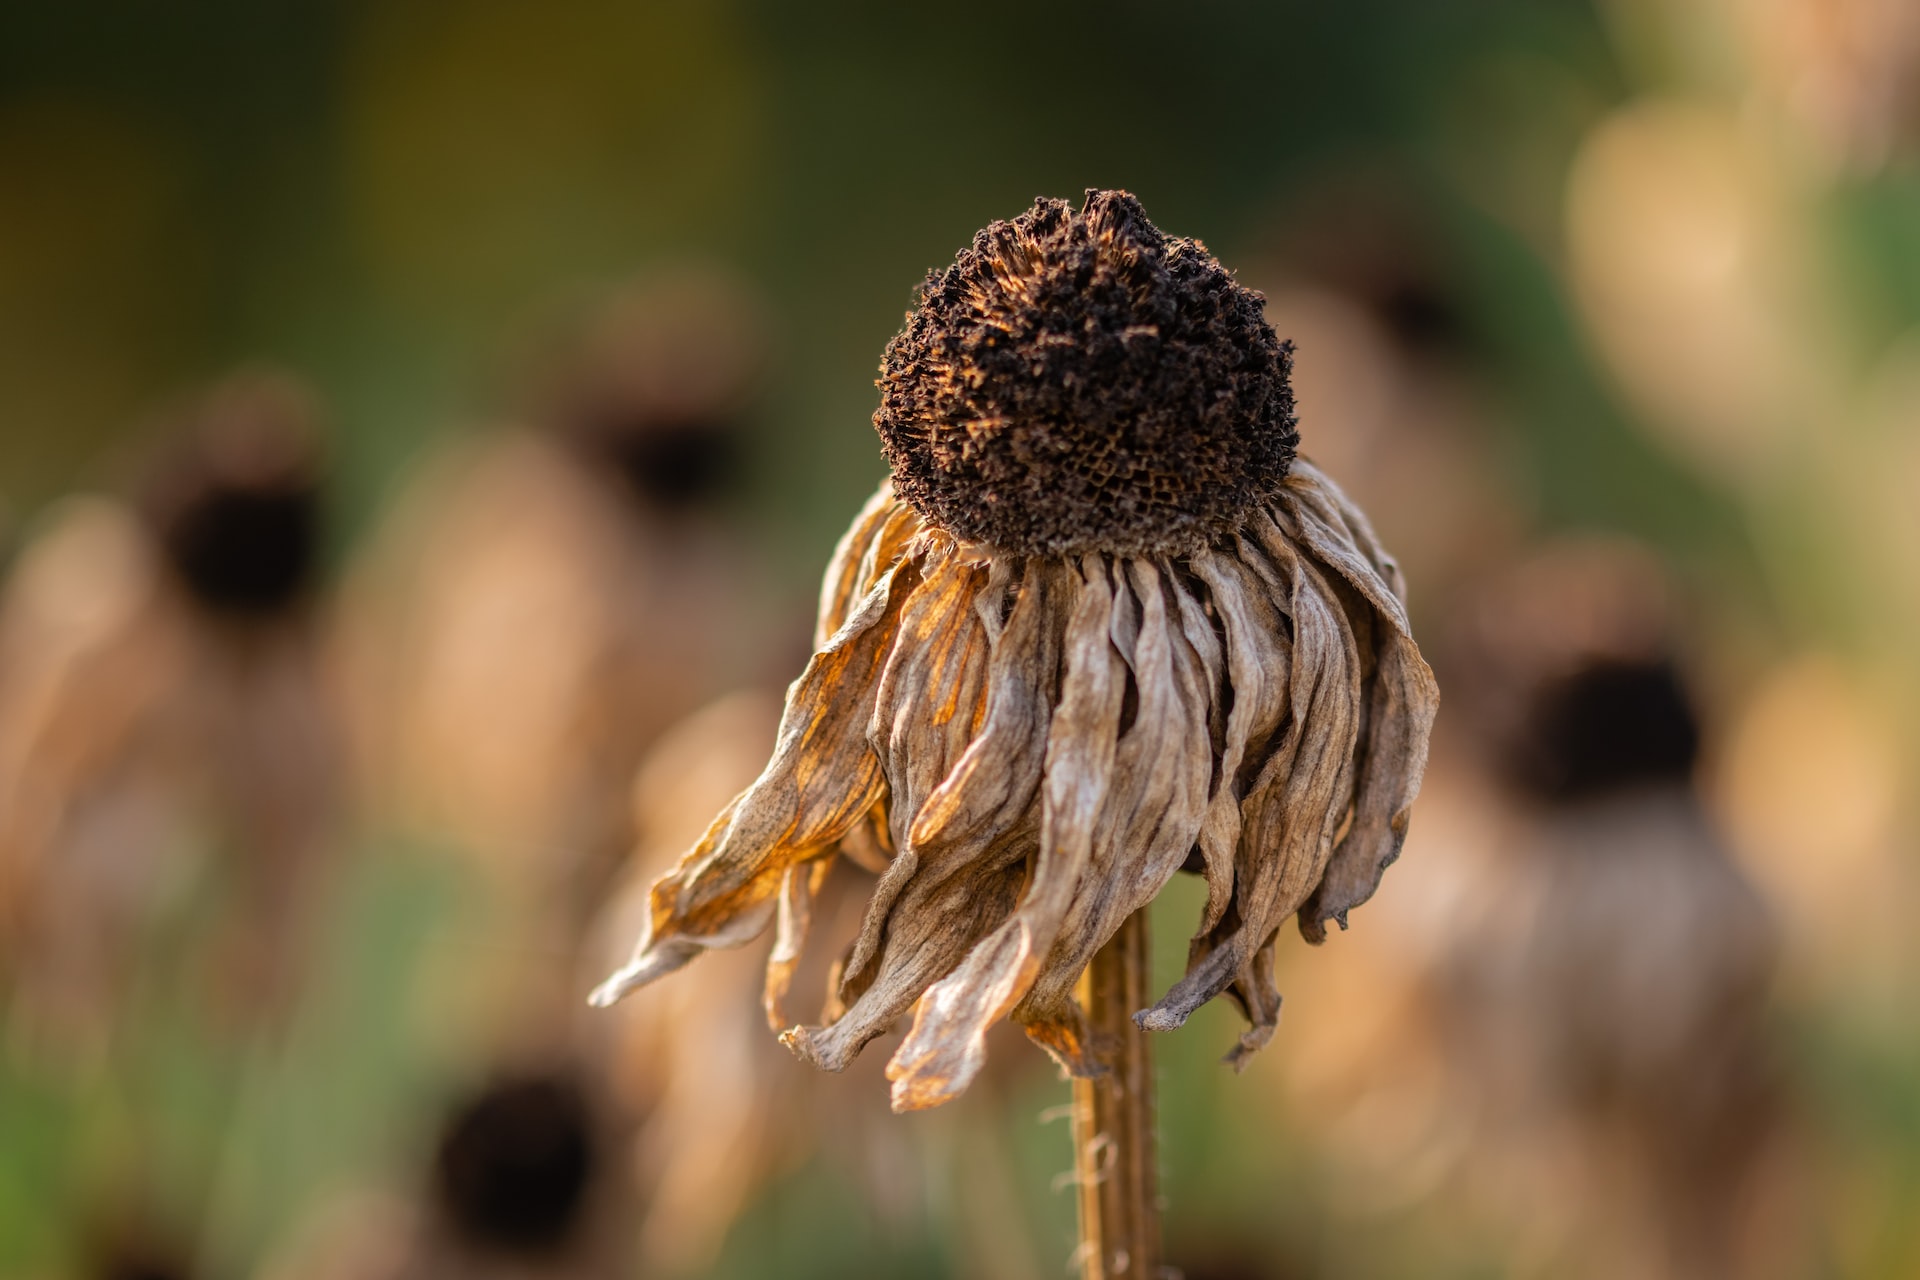 Dried sunflower due to extreme heat